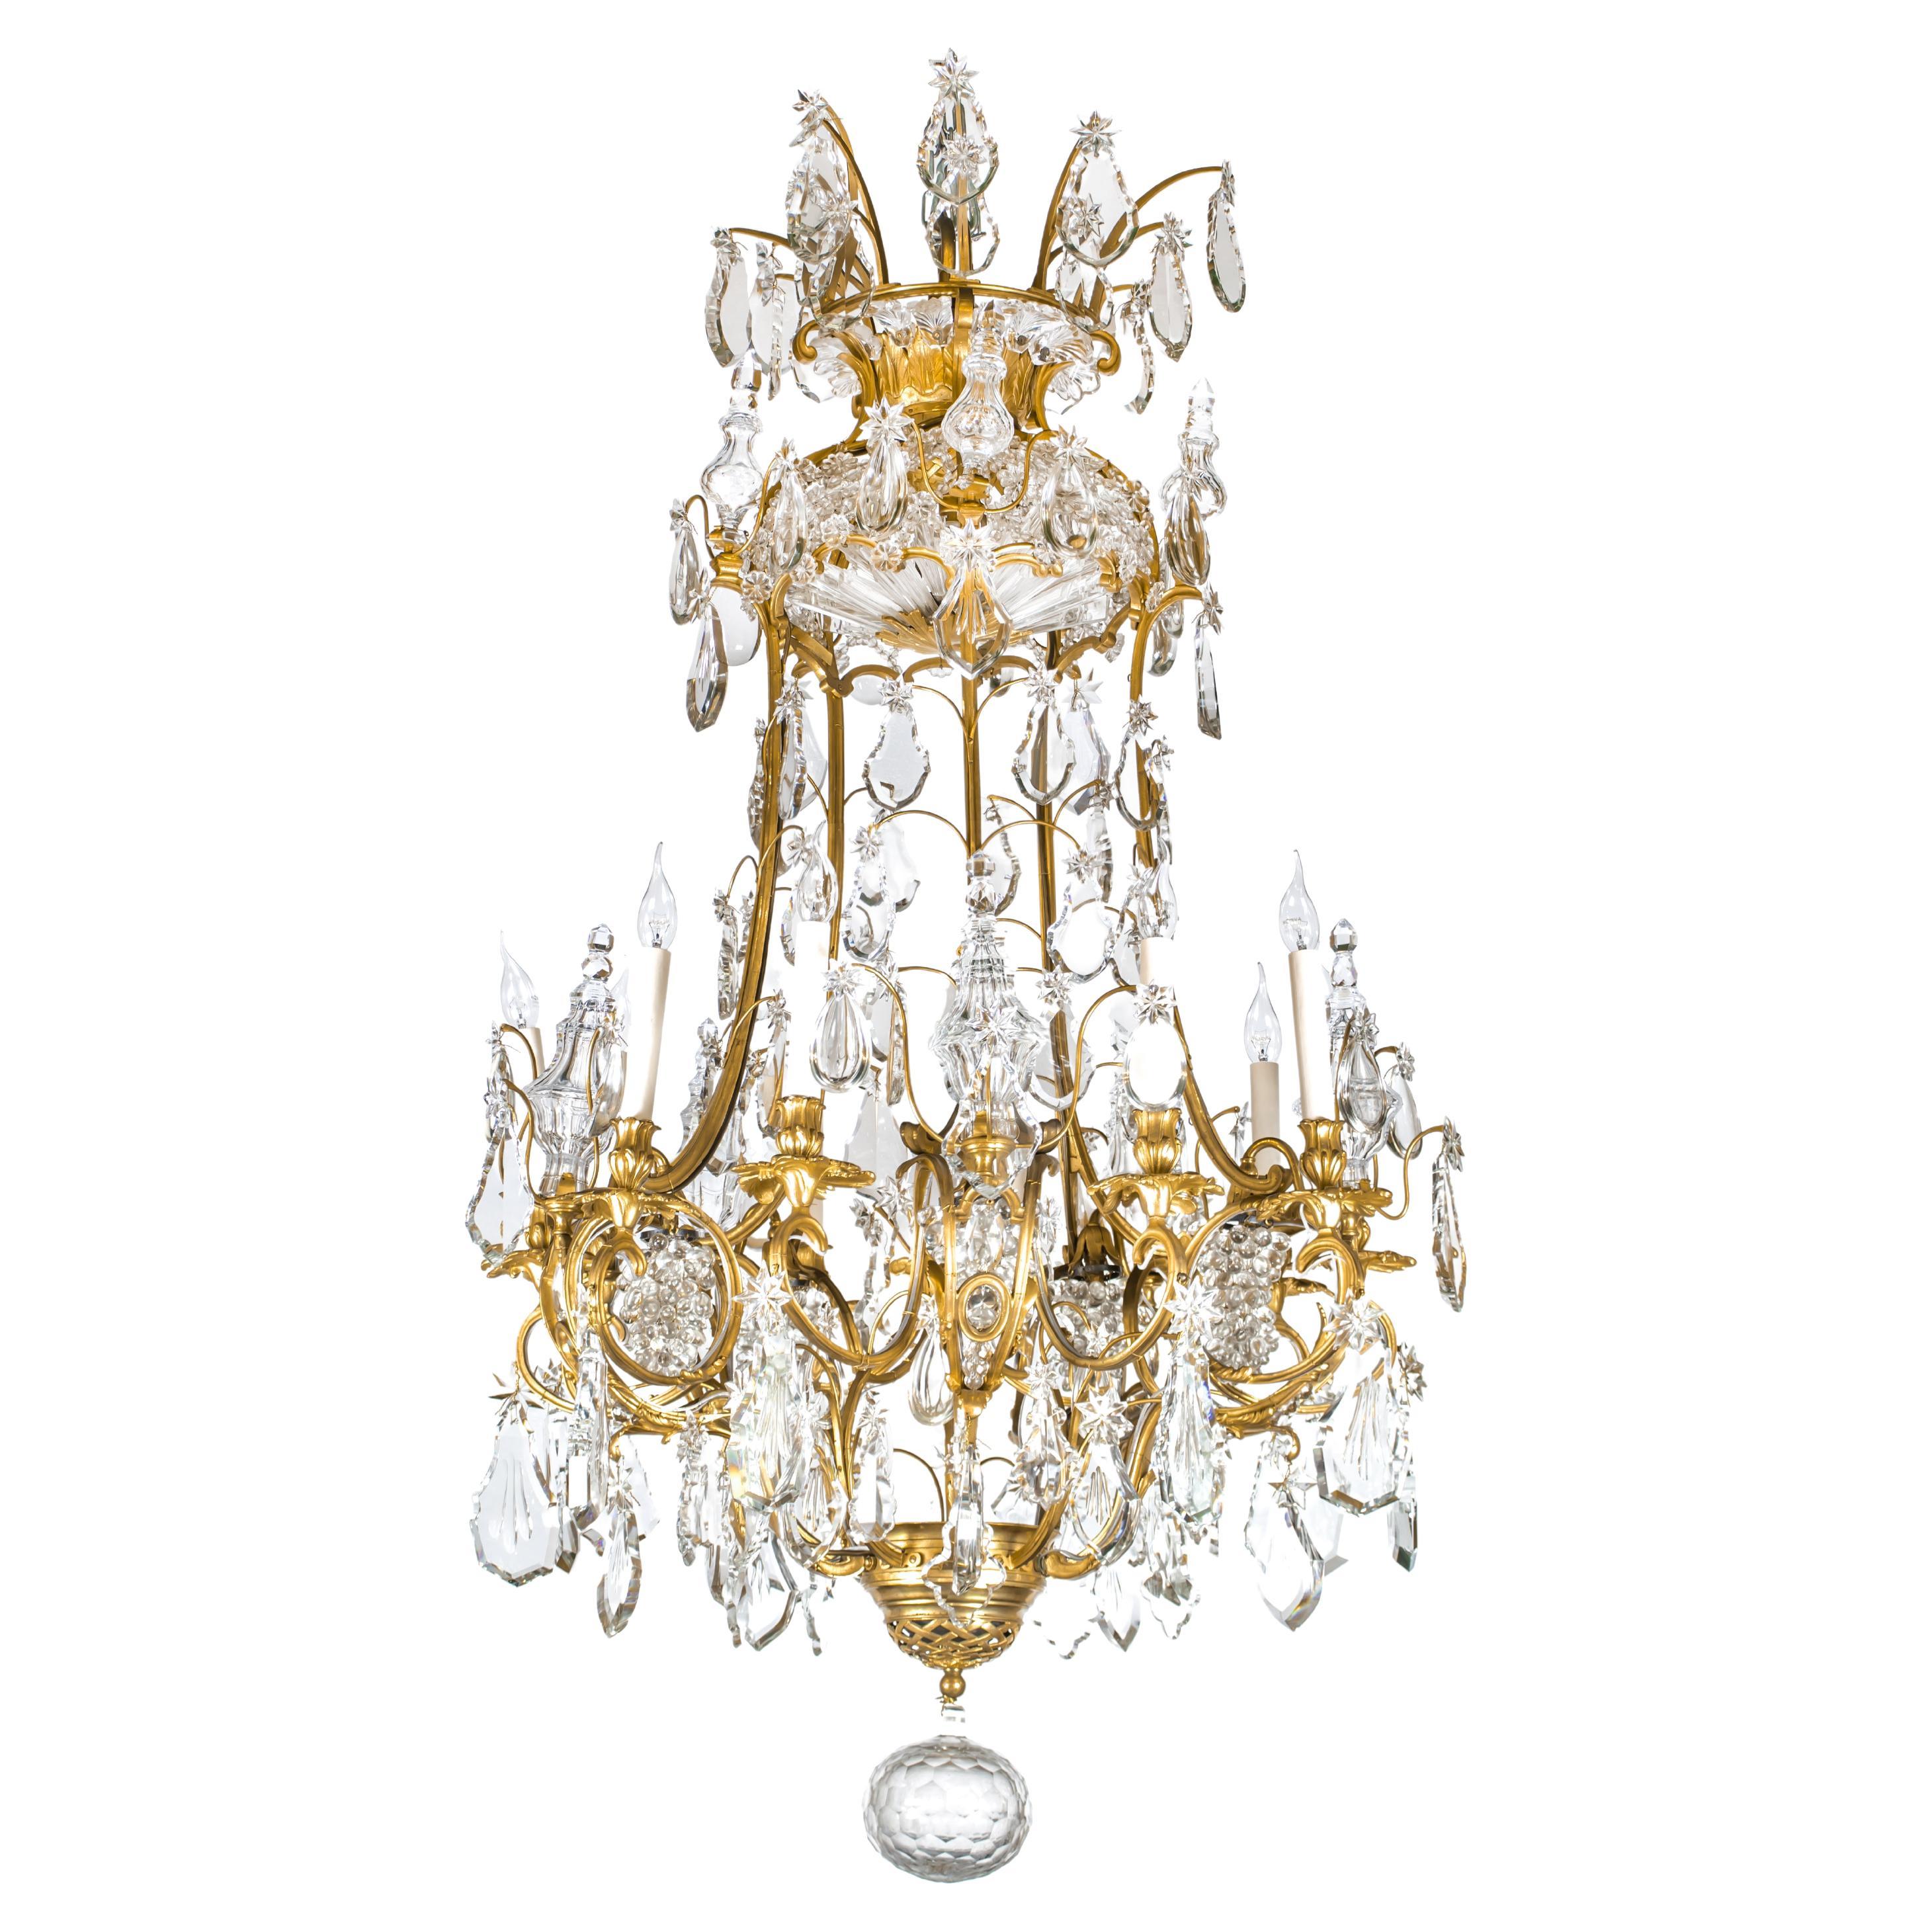 19th Century French Ormolu Ten Lights Chandelier with Cut Crystal Ornaments